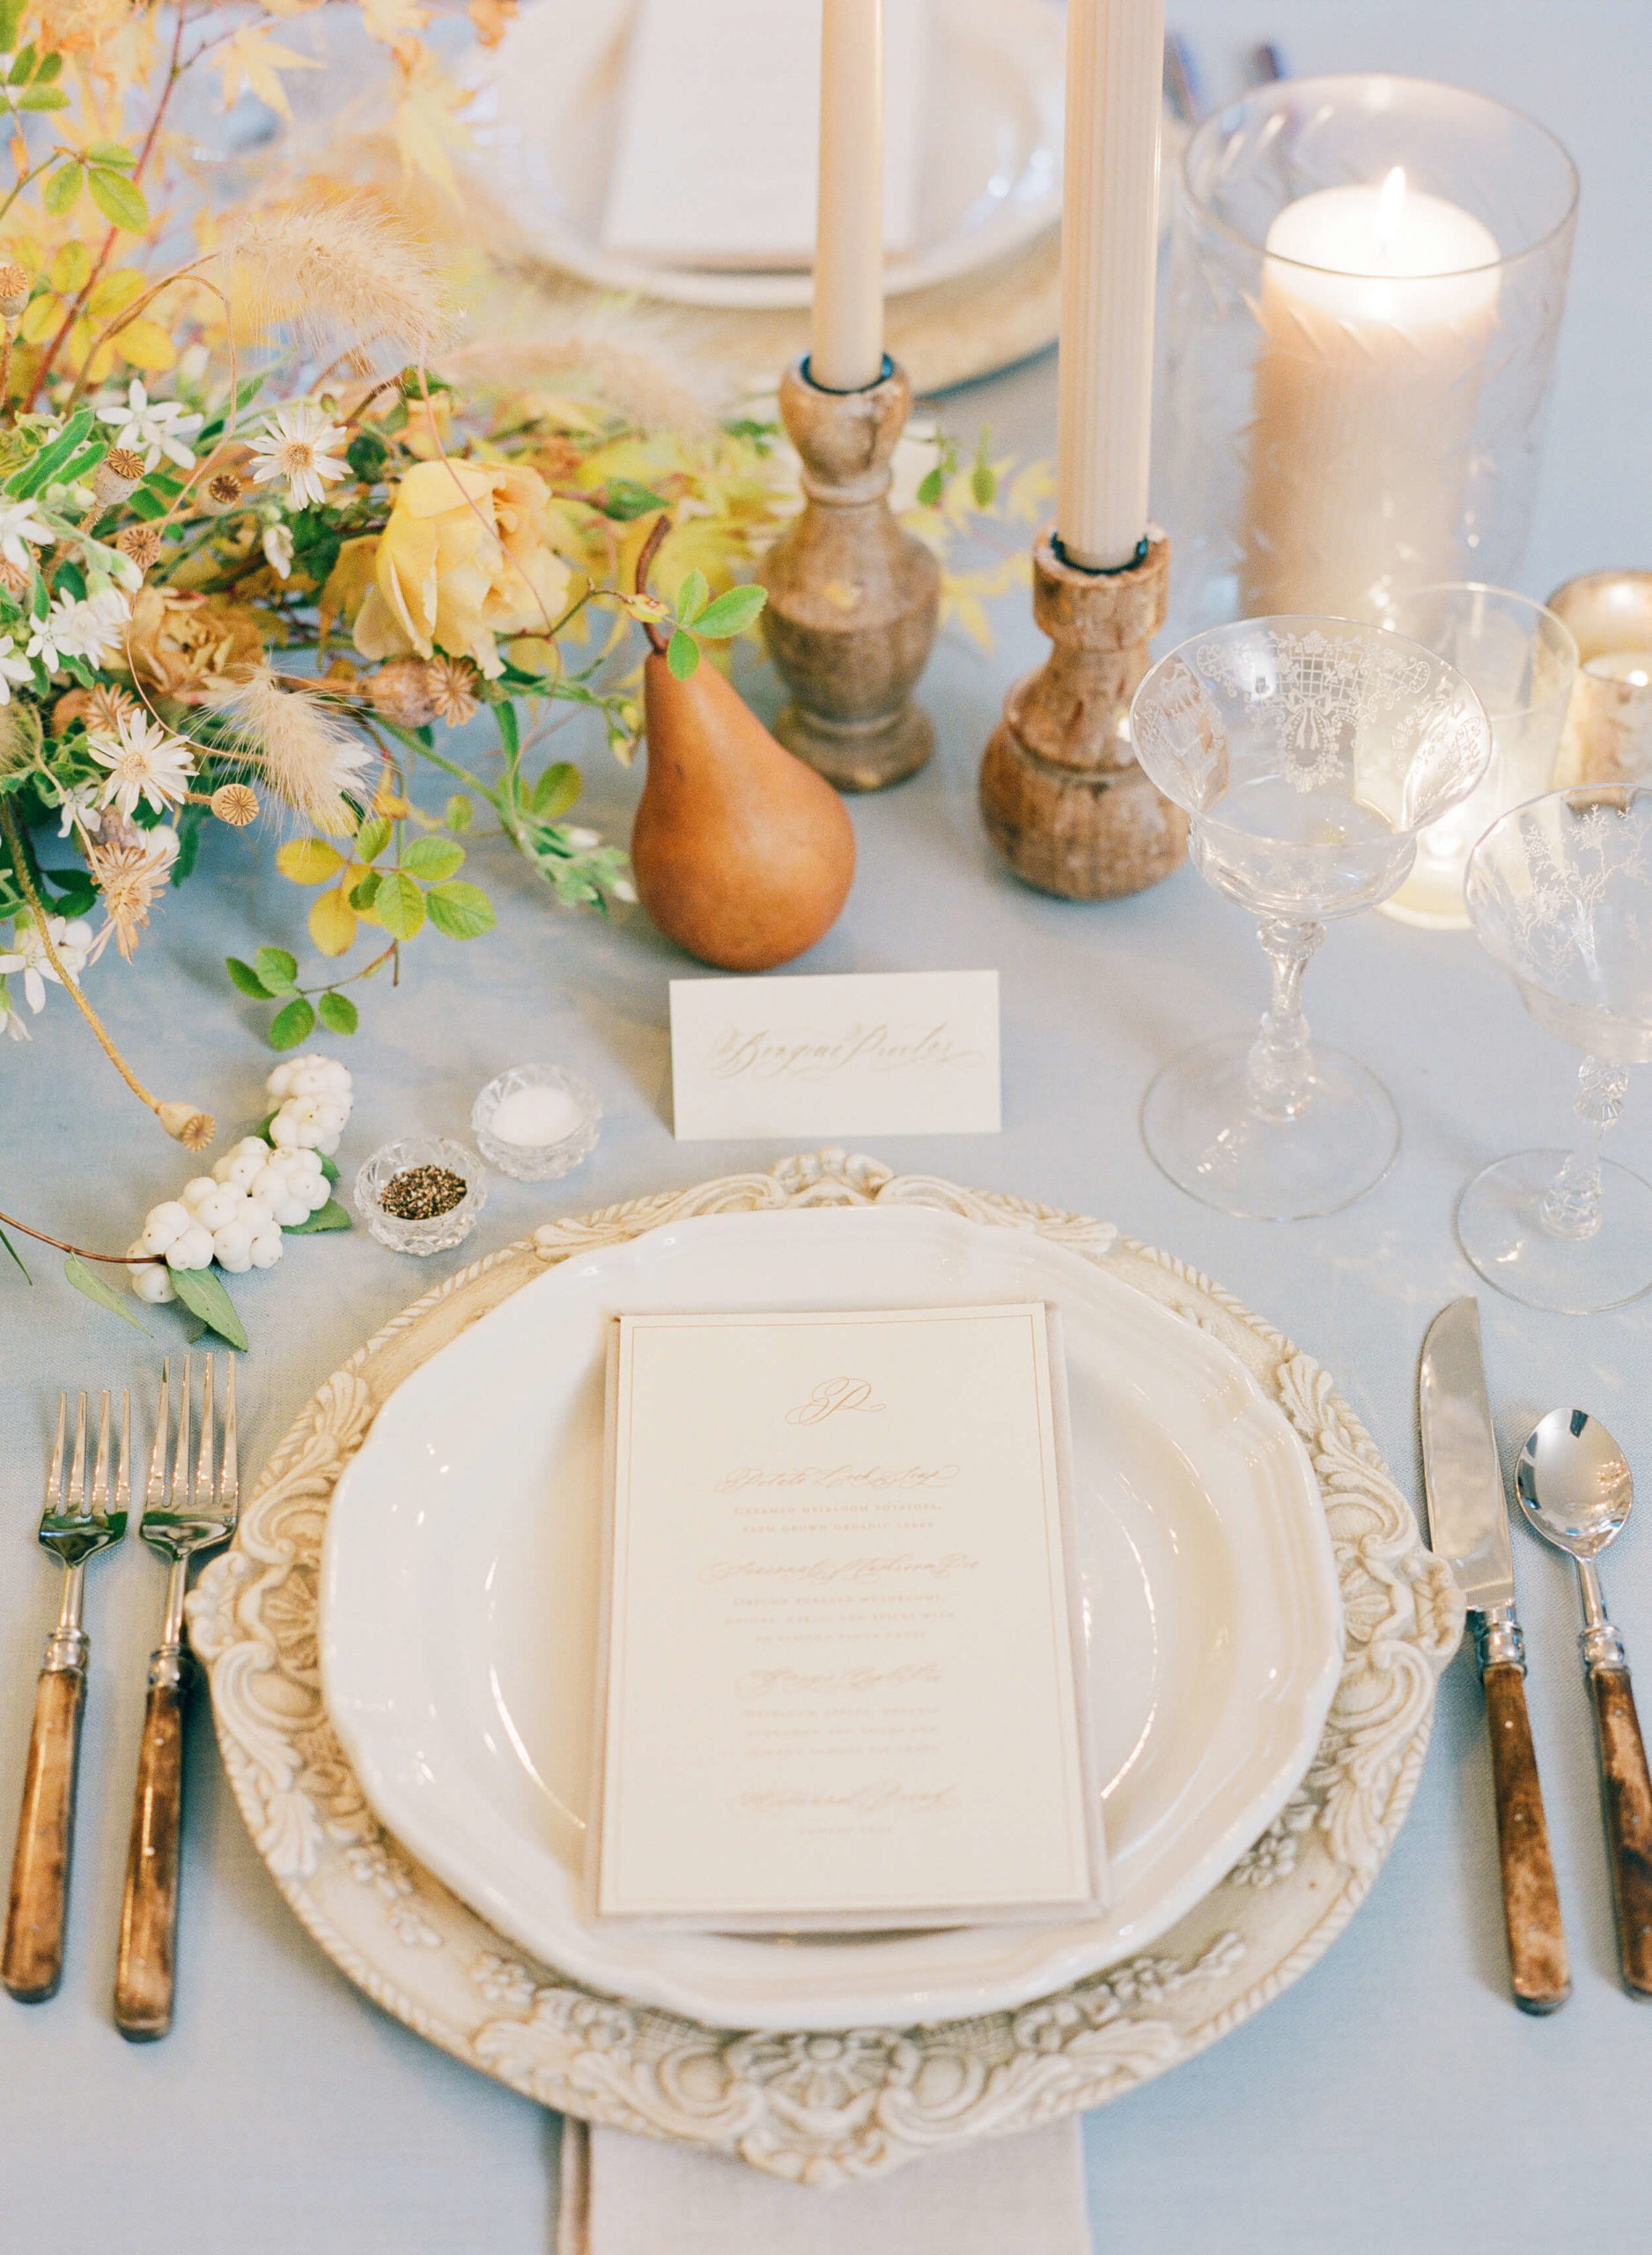 Joy Proctor finds inspiration and beauty creating and designing at home with the KT Merry Presets.